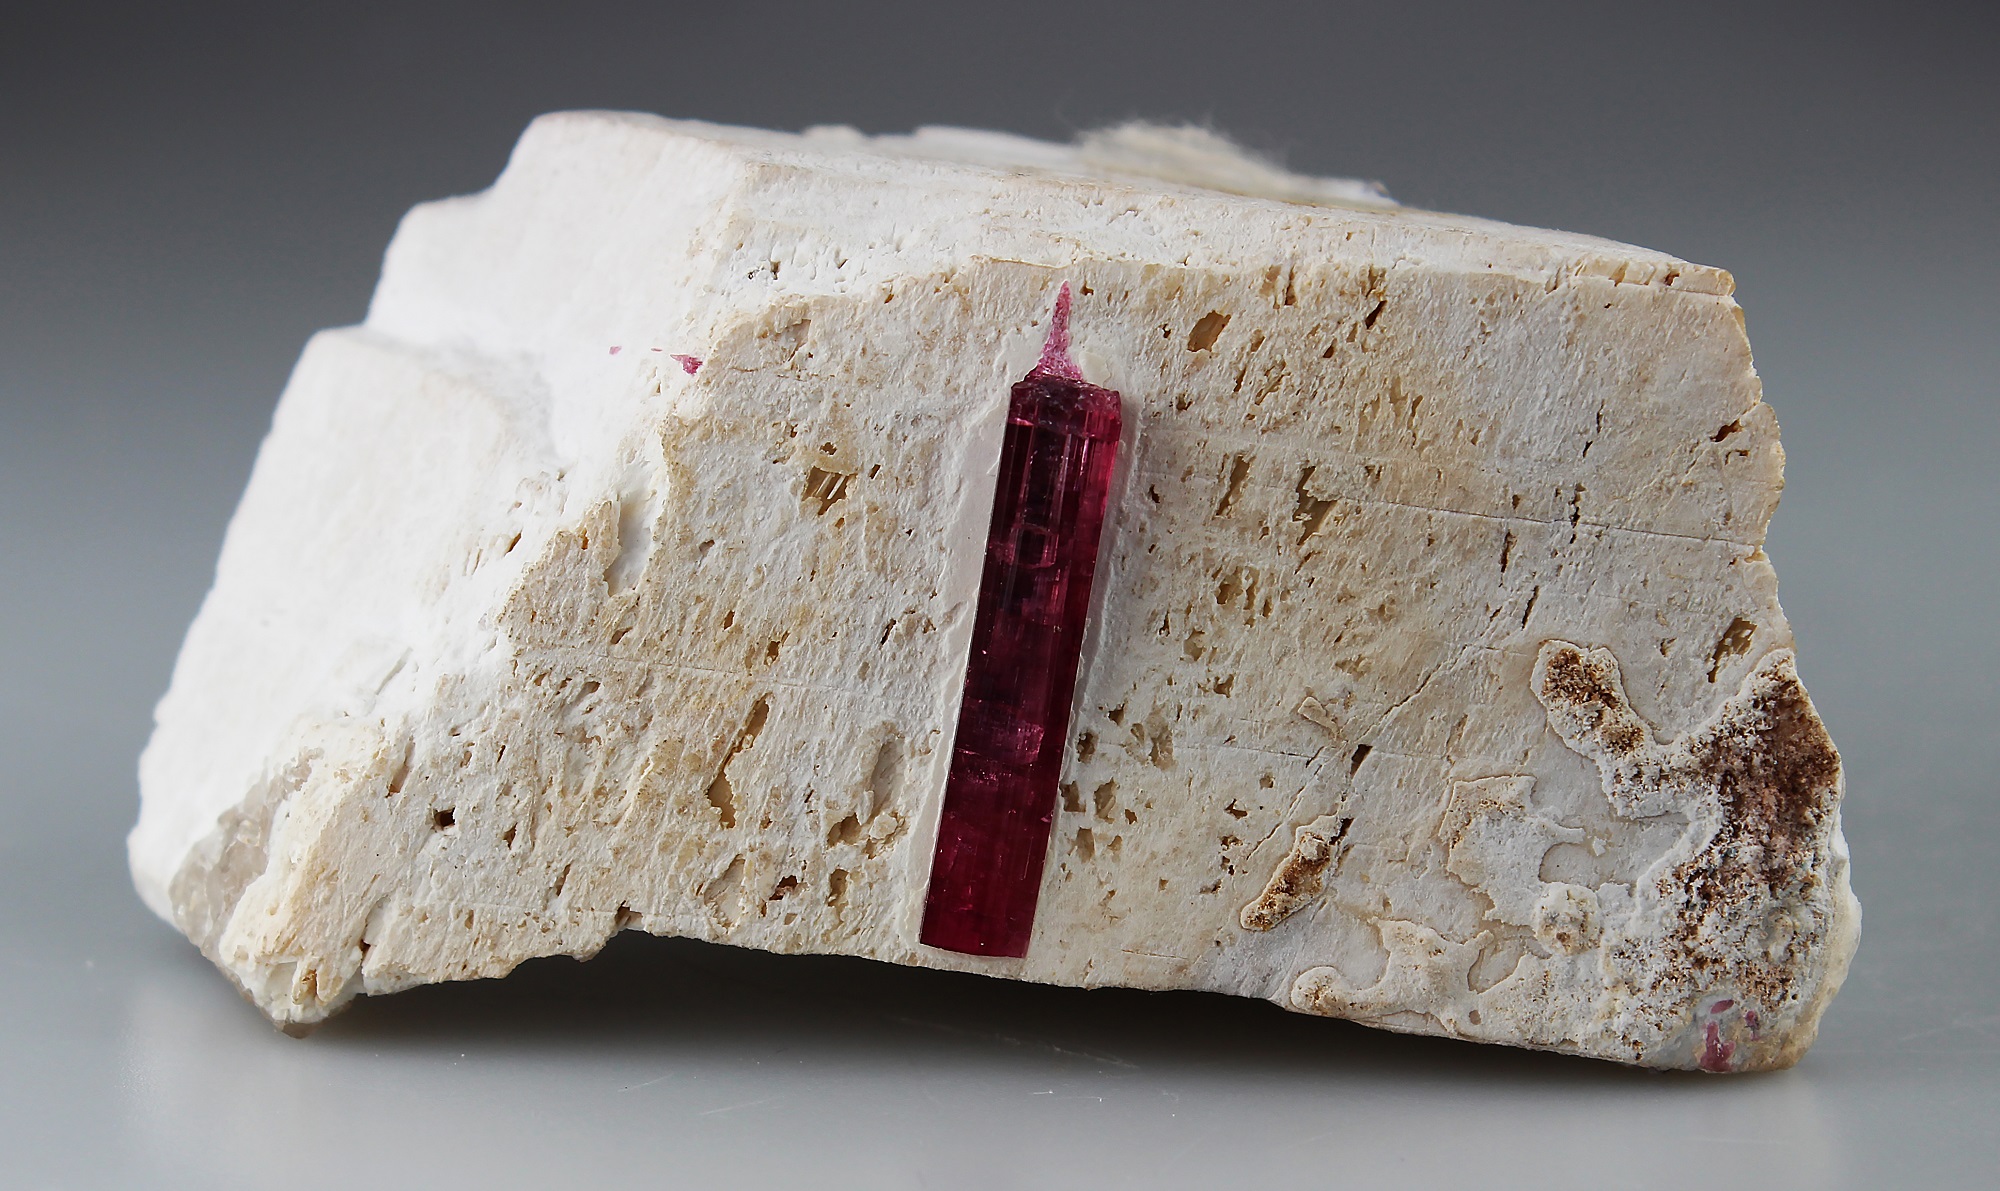 Buying Guide: What Are the Different Types of Tourmaline? - - rubelline tourmaline GemA HM